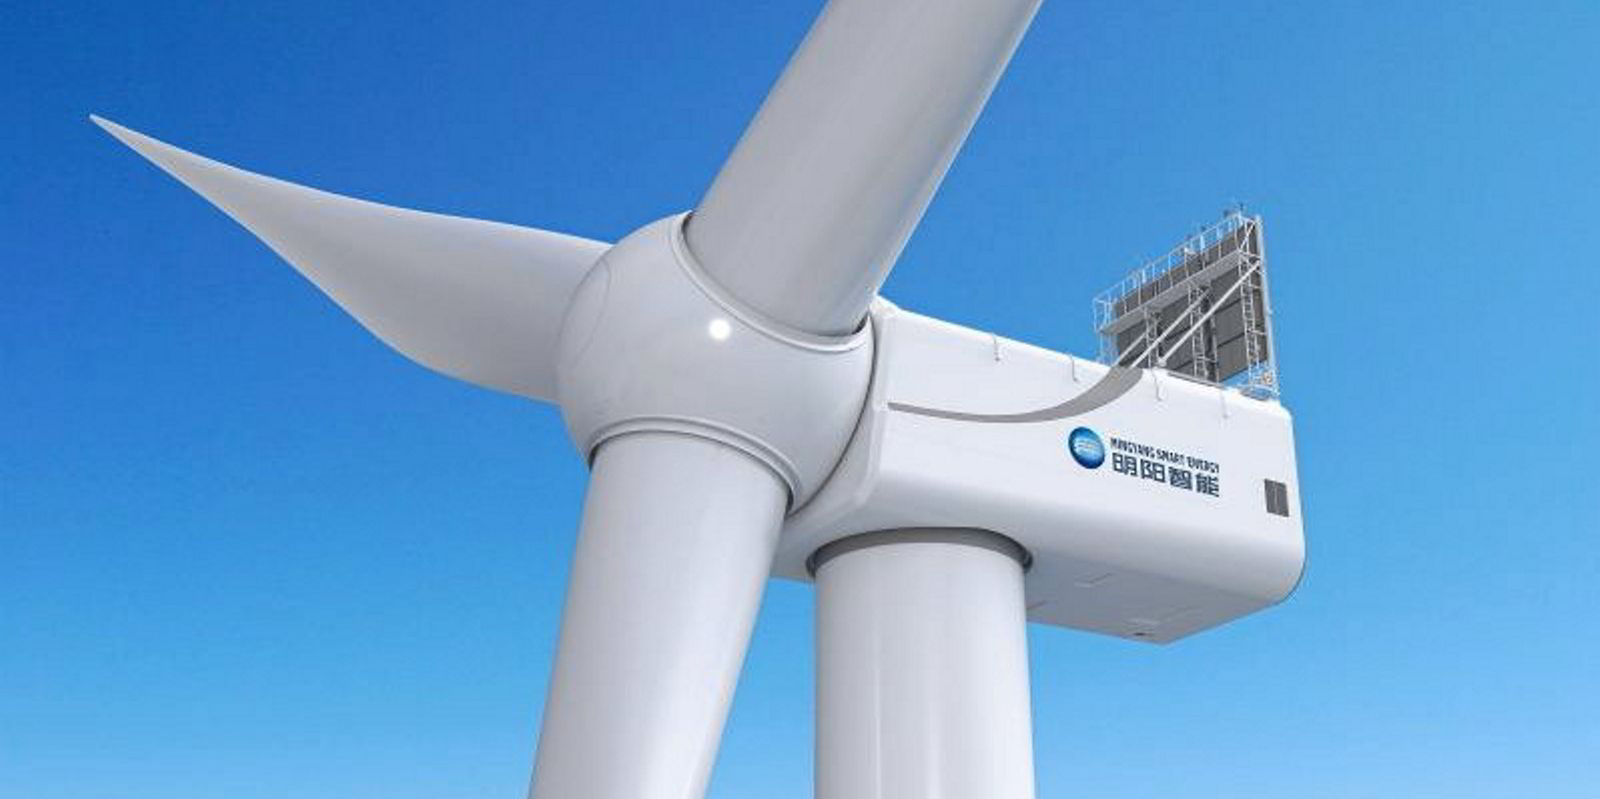 China's Mingyang looks 'beyond 18MW' with 140-metre blade offshore wind turbine giant | Recharge